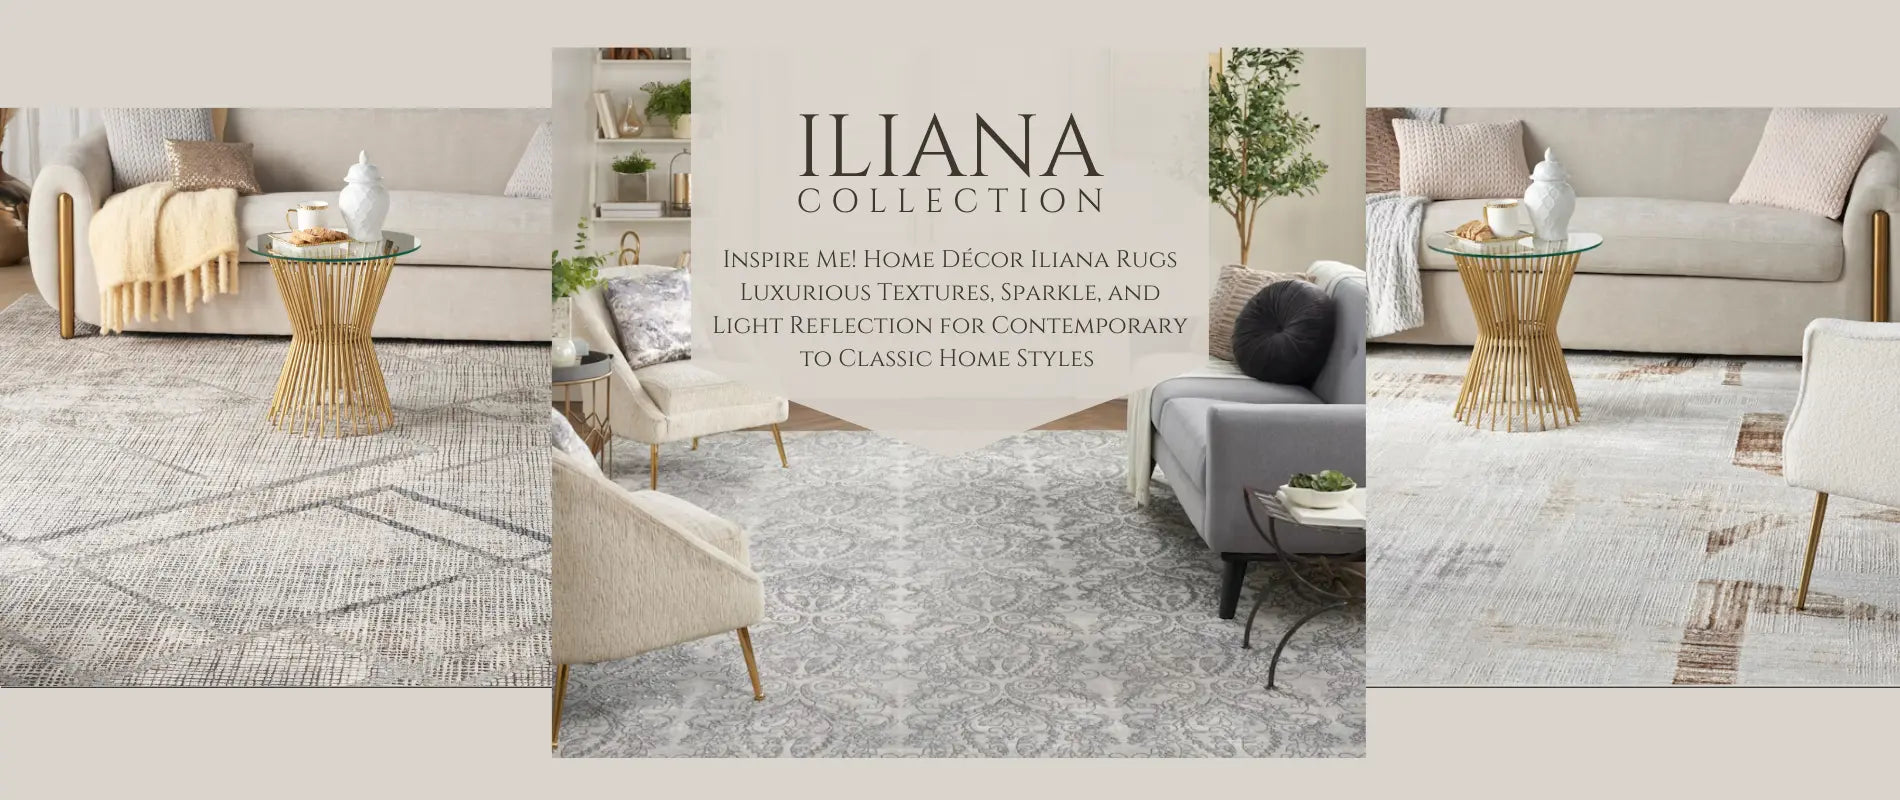 Luxurious Iliana Area Rugs with Sparkle and Soft Texture in Neutral Hues for Modern Home Decor